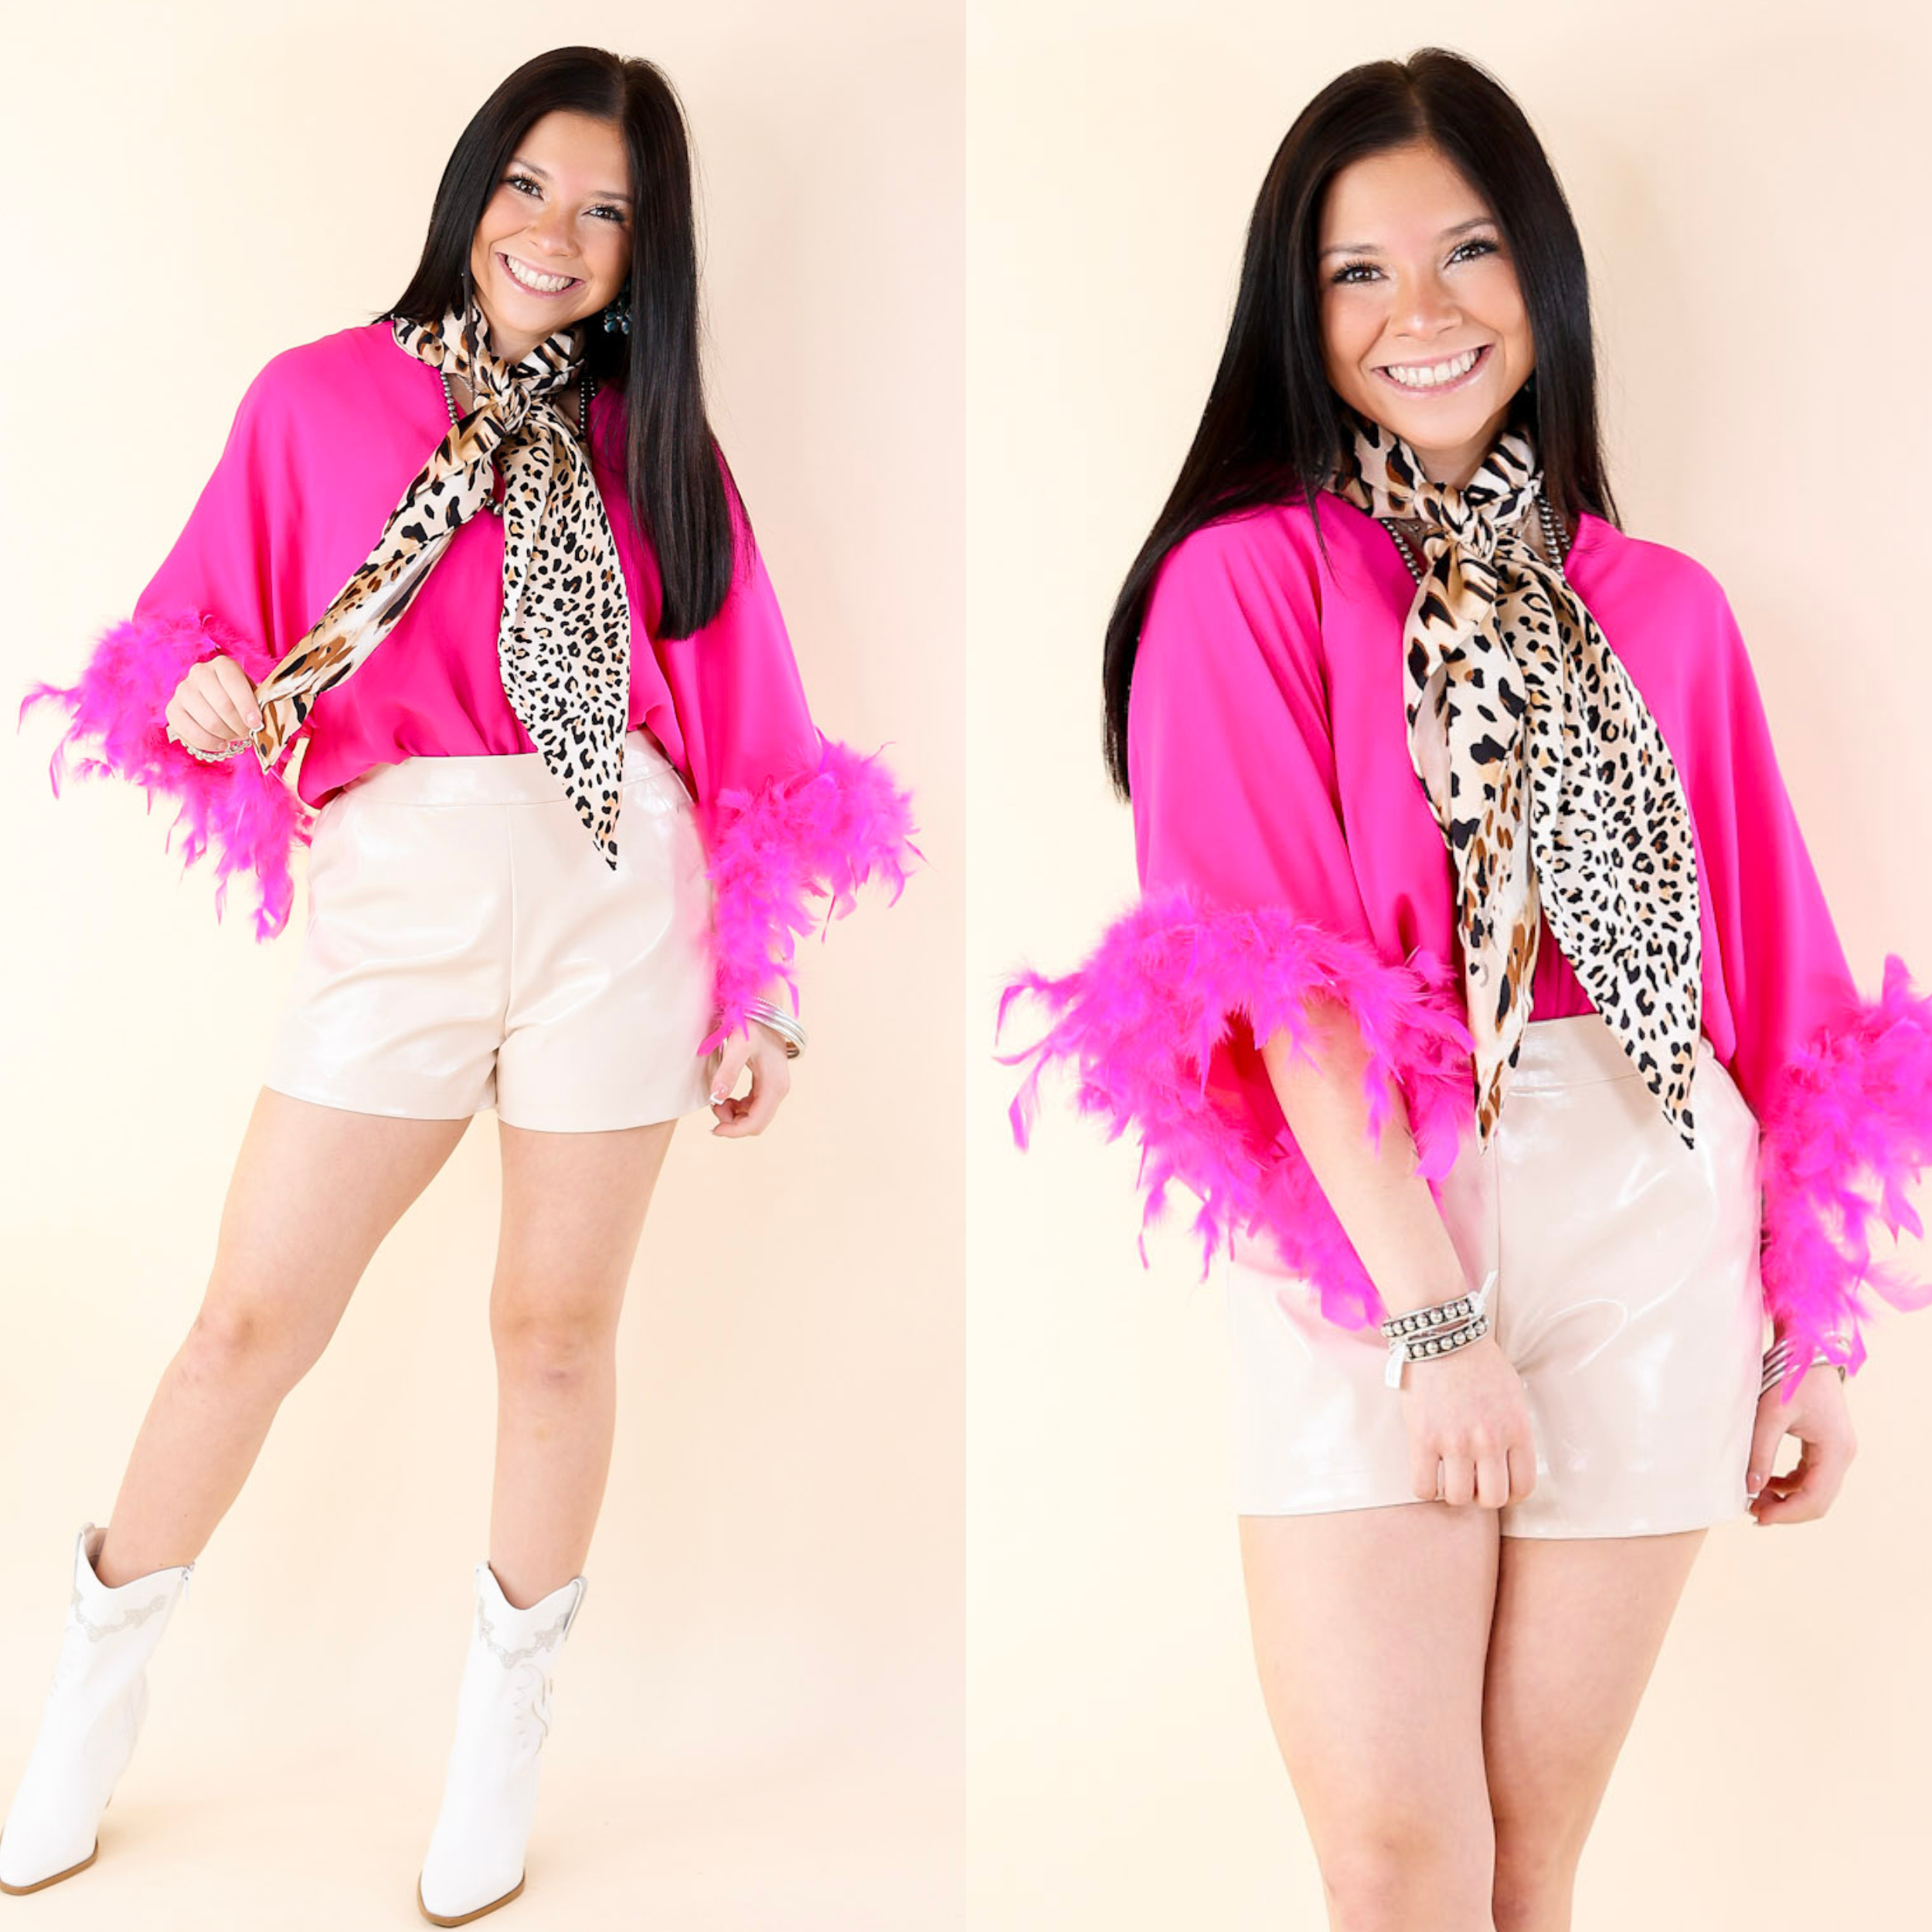 Party Plans V Neck Bodysuit with Feather Sleeves in Fuchsia Pink - Giddy Up Glamour Boutique